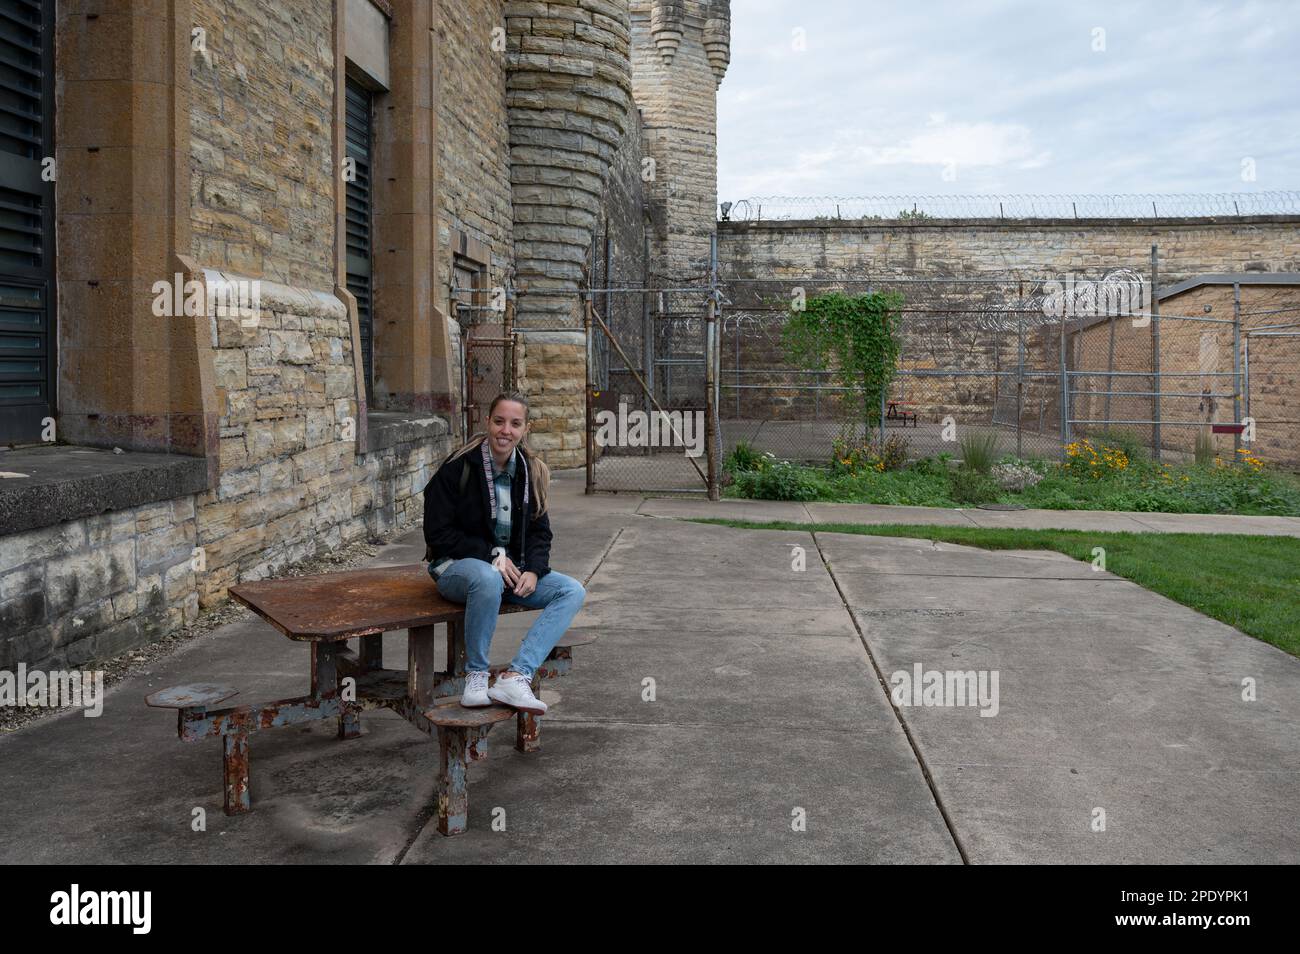 A young girl sitting at a table in the main courtyard of Old Joliet Prison, a former abandoned jail Stock Photo